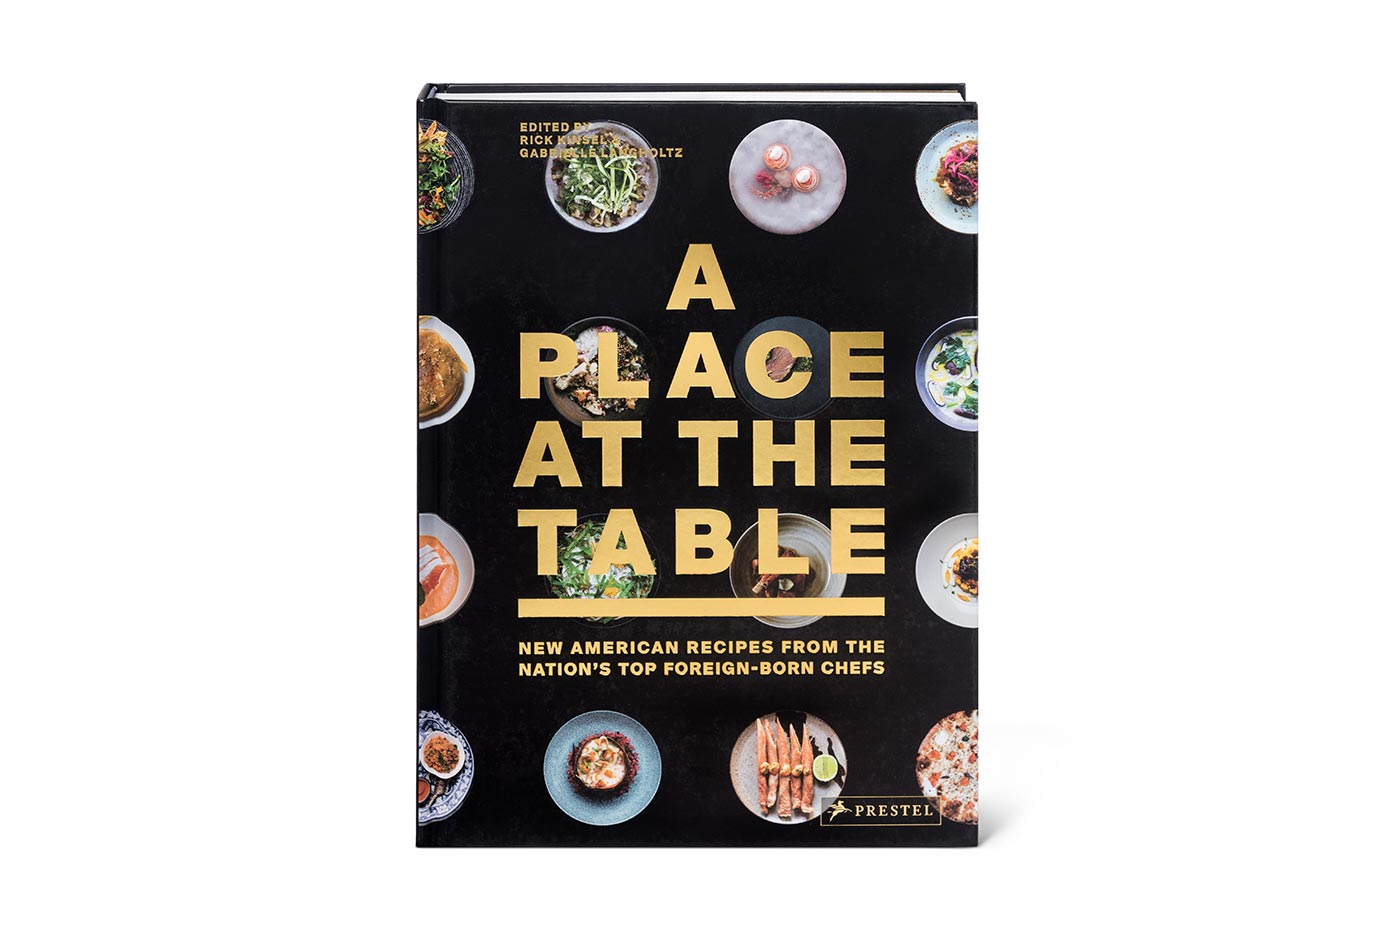 A Place at the Table: New American Recipes from the Nation's Top Foreign-Born Chefs